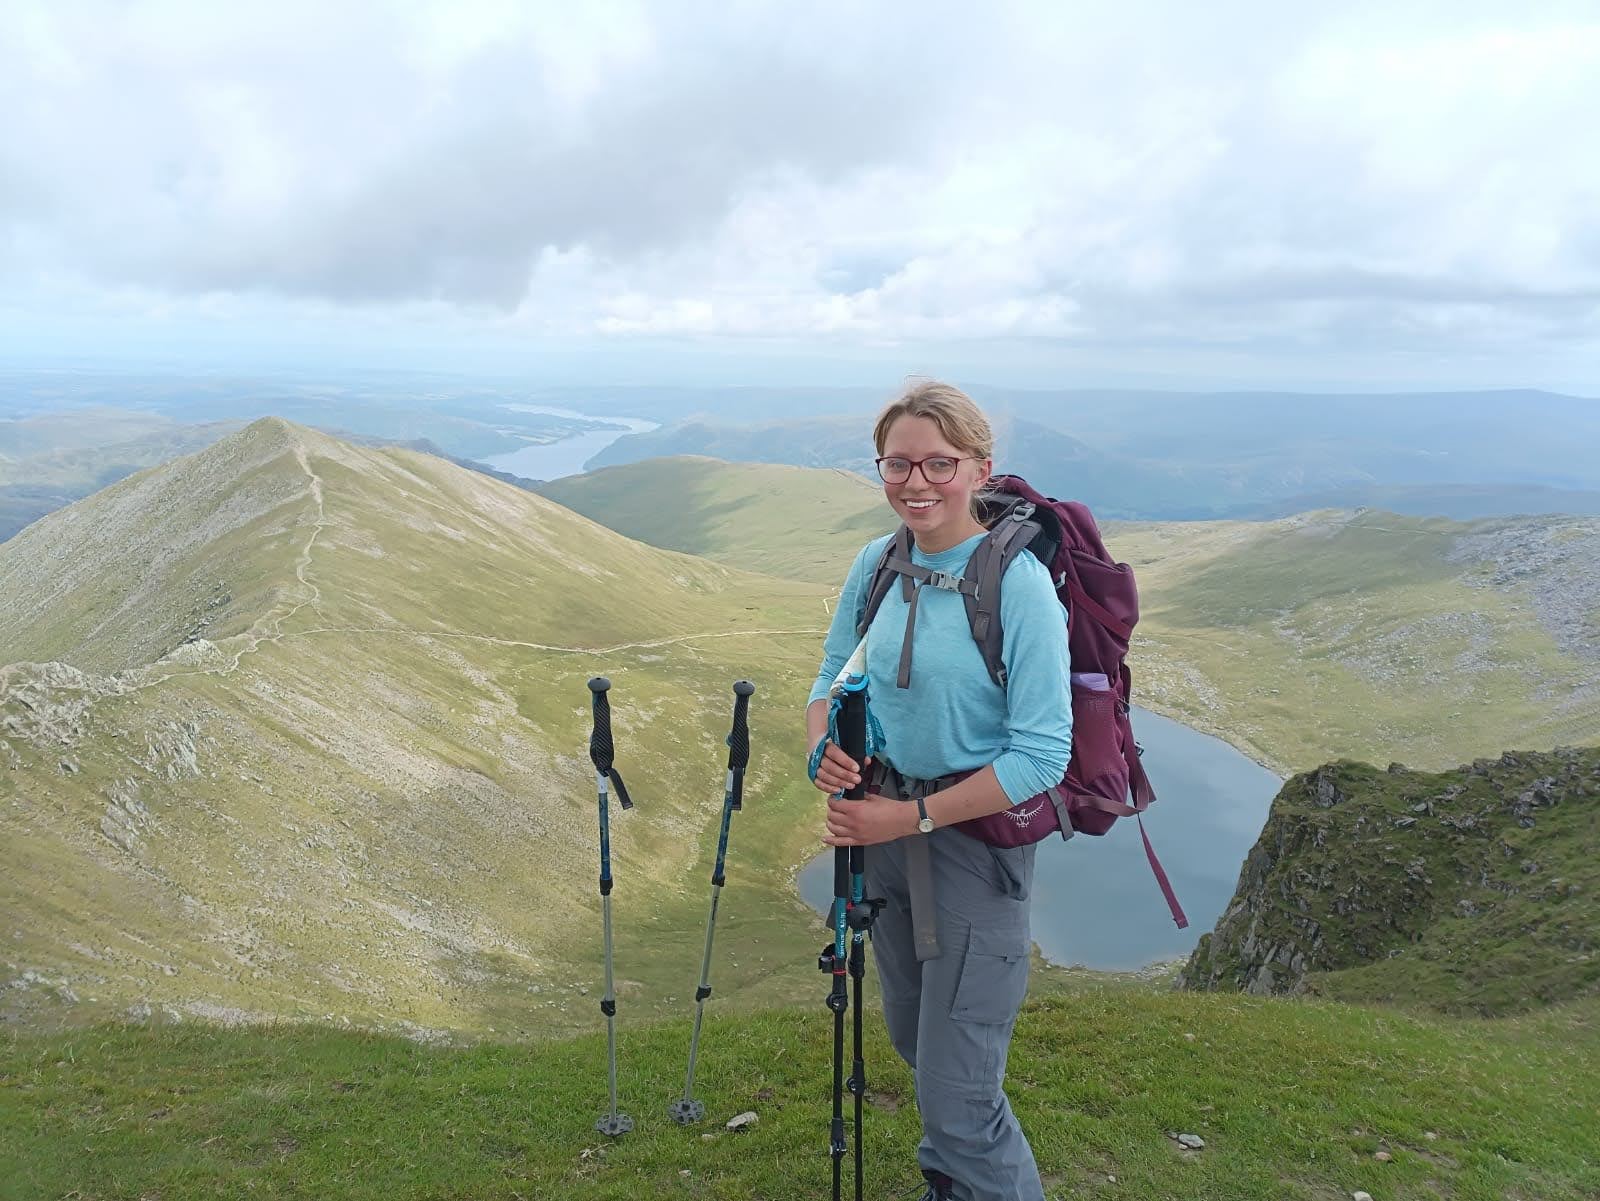 Hannah Furborough, DofE Young Leader Volunteering on an Expedition in the Lake District.